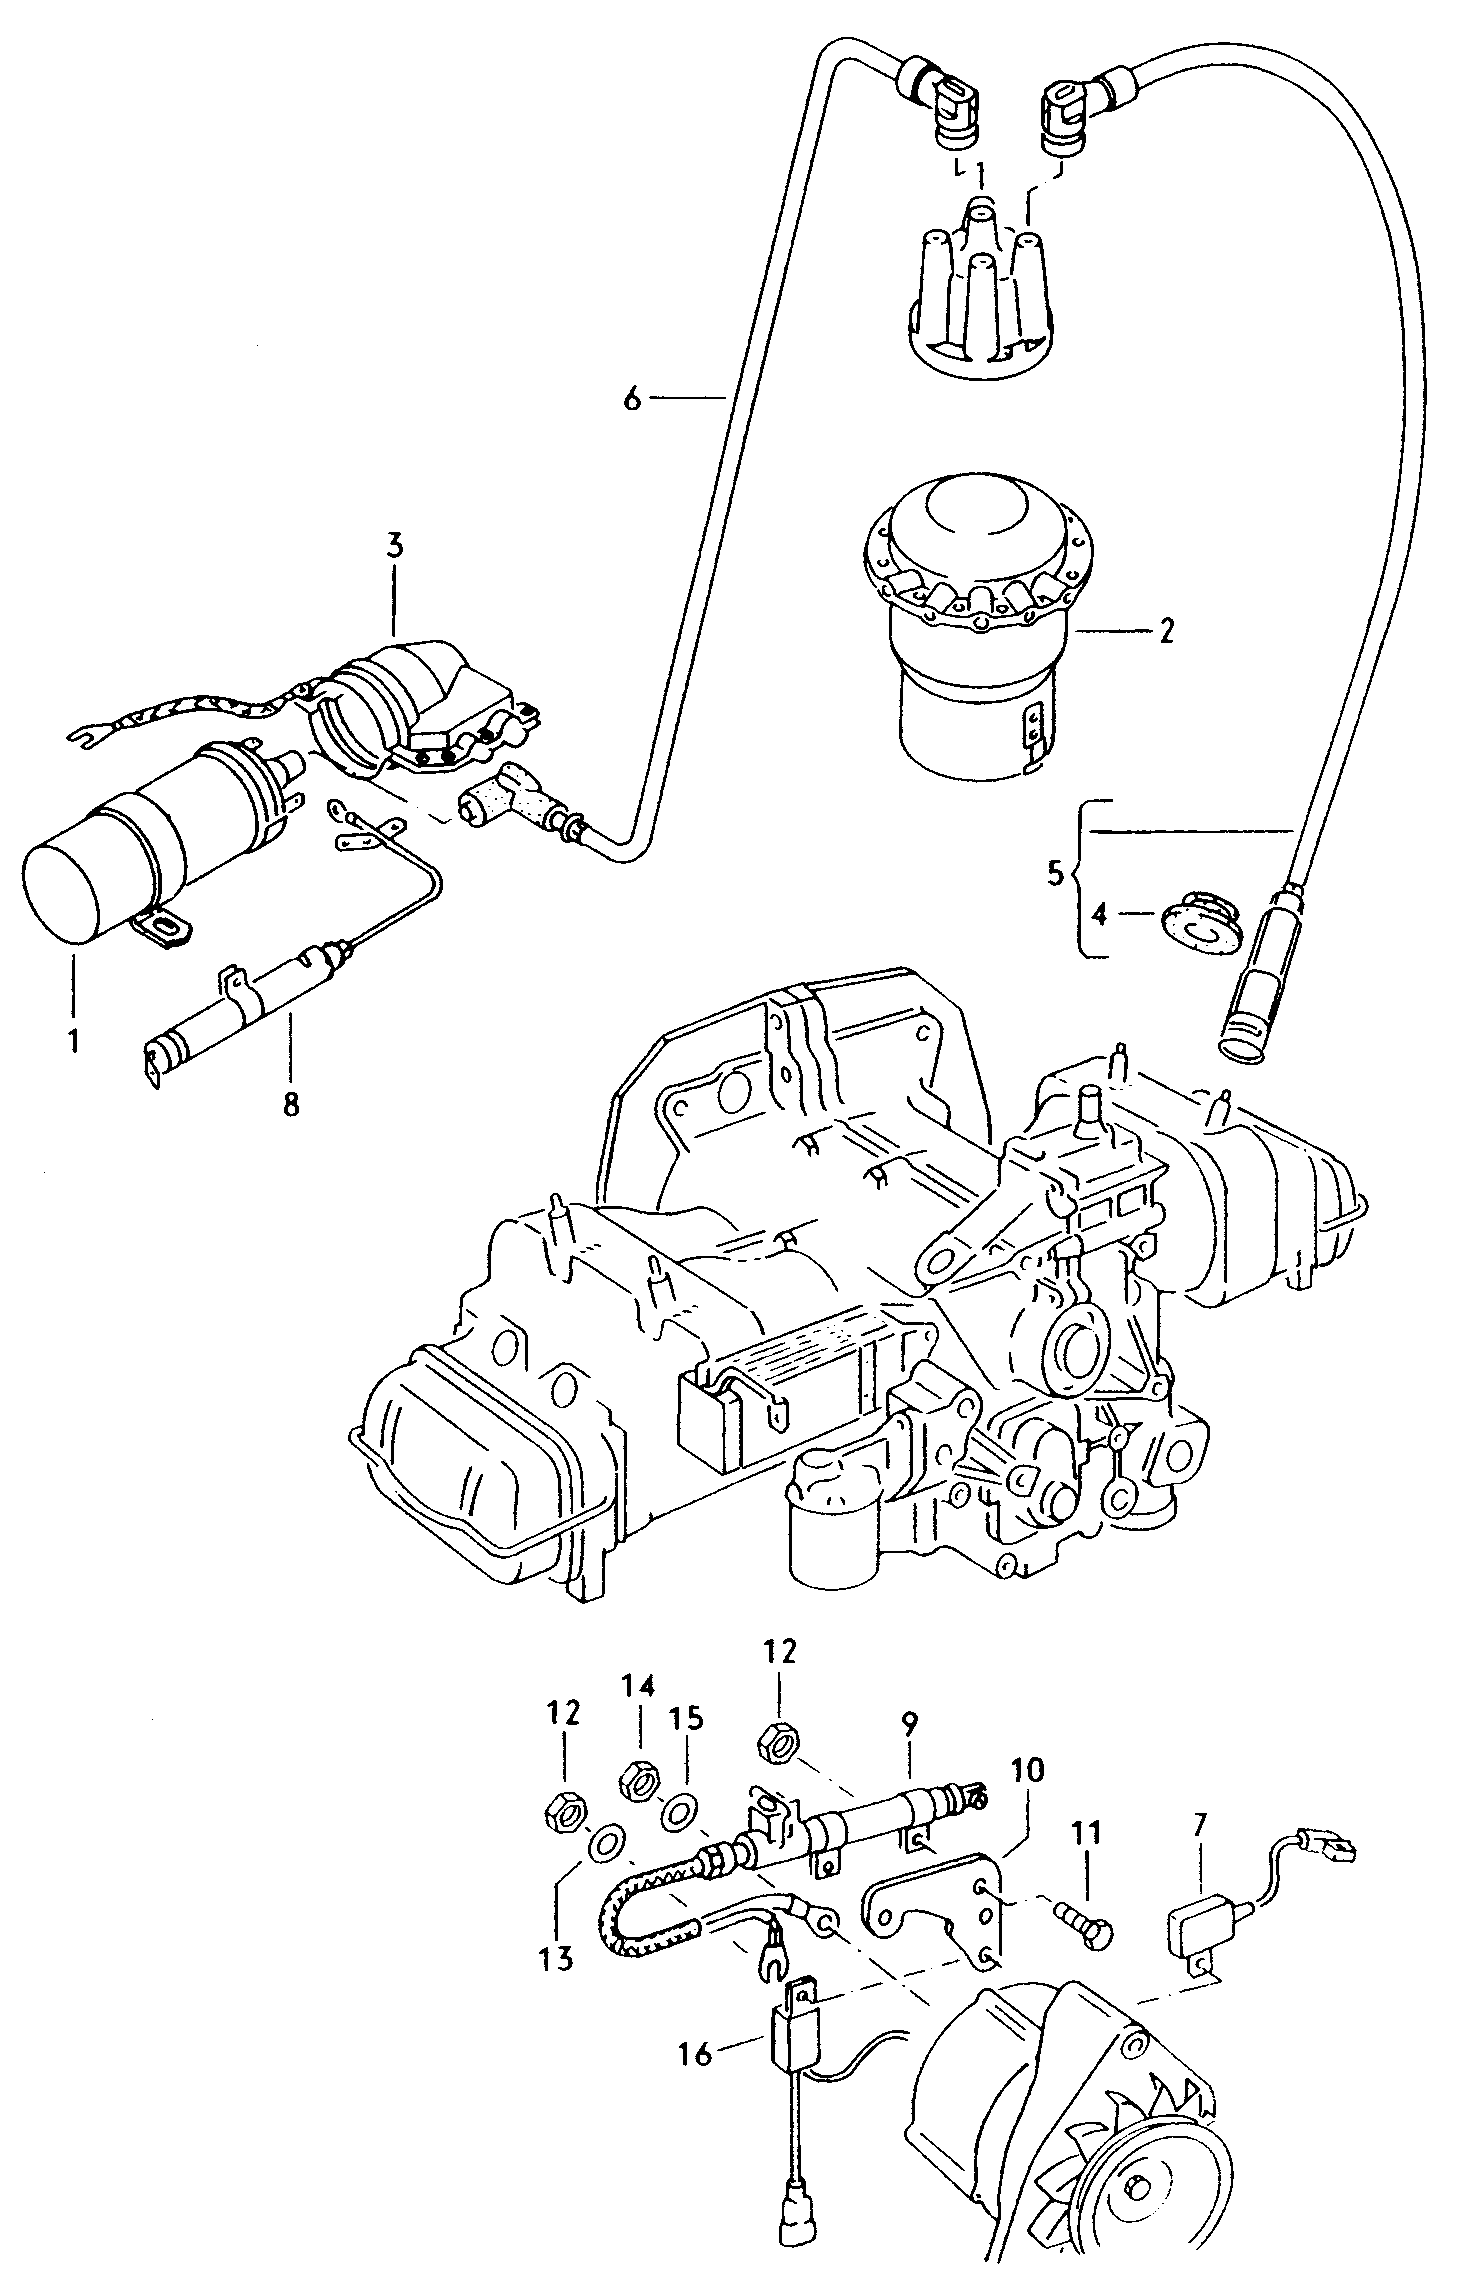 ignition system with extended<br>suppression  - Typ 2/syncro - t2